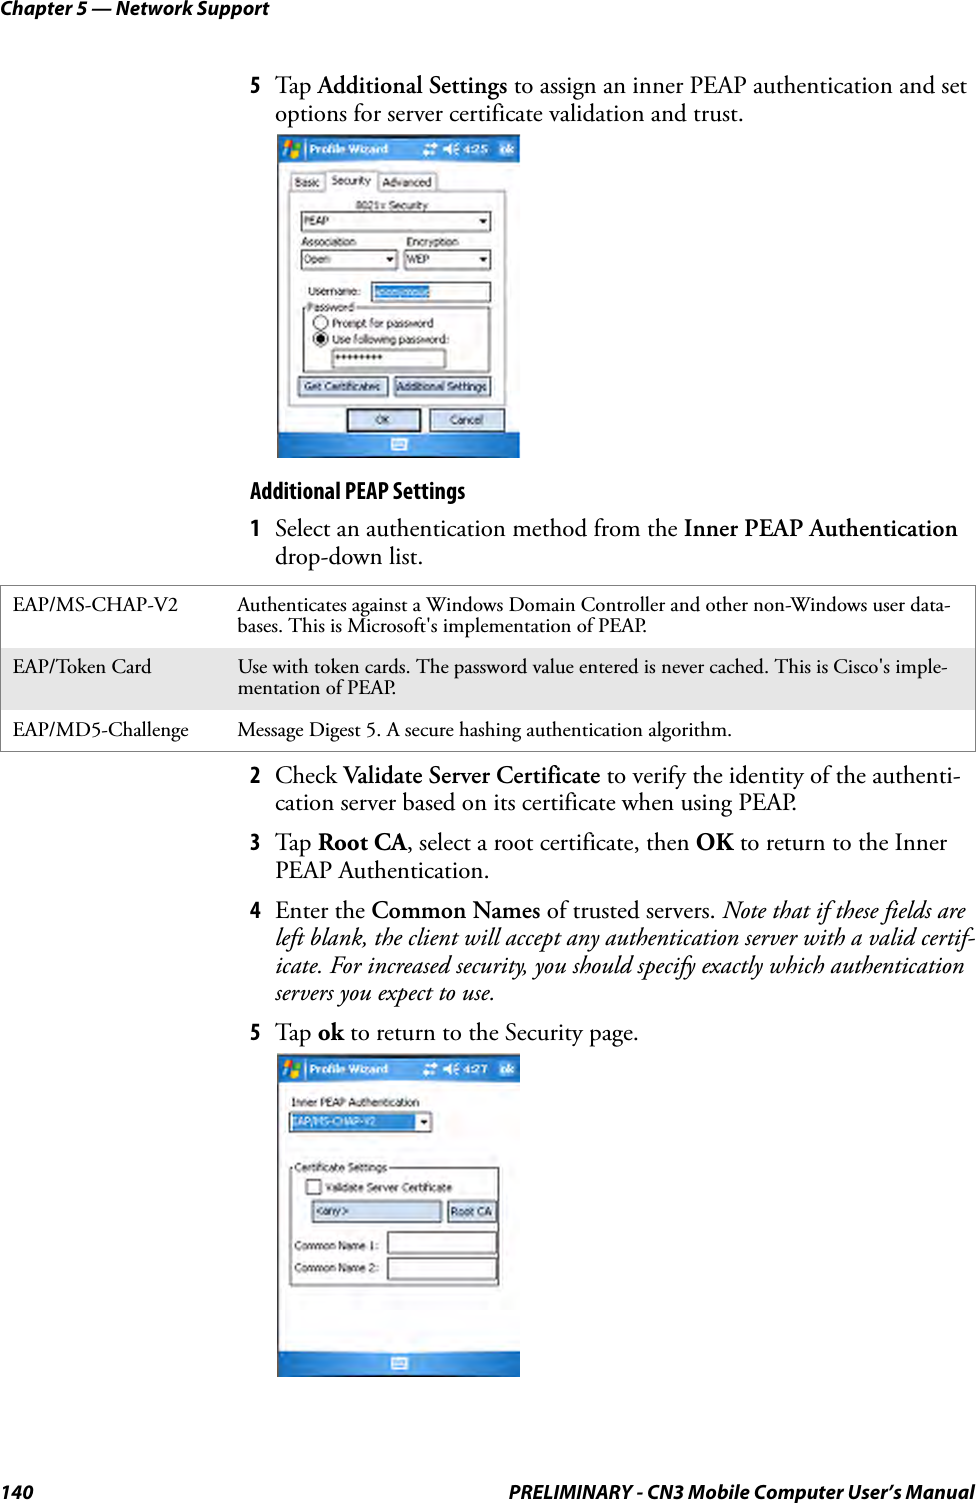 Chapter 5 — Network Support140 PRELIMINARY - CN3 Mobile Computer User’s Manual5Tap  Additional Settings to assign an inner PEAP authentication and set options for server certificate validation and trust.Additional PEAP Settings1Select an authentication method from the Inner PEAP Authentication drop-down list.2Check Validate Server Certificate to verify the identity of the authenti-cation server based on its certificate when using PEAP.3Tap  Root CA, select a root certificate, then OK to return to the Inner PEAP Authentication.4Enter the Common Names of trusted servers. Note that if these fields are left blank, the client will accept any authentication server with a valid certif-icate. For increased security, you should specify exactly which authentication servers you expect to use.5Tap  ok to return to the Security page.EAP/MS-CHAP-V2 Authenticates against a Windows Domain Controller and other non-Windows user data-bases. This is Microsoft&apos;s implementation of PEAP.EAP/Token Card Use with token cards. The password value entered is never cached. This is Cisco&apos;s imple-mentation of PEAP.EAP/MD5-Challenge Message Digest 5. A secure hashing authentication algorithm.